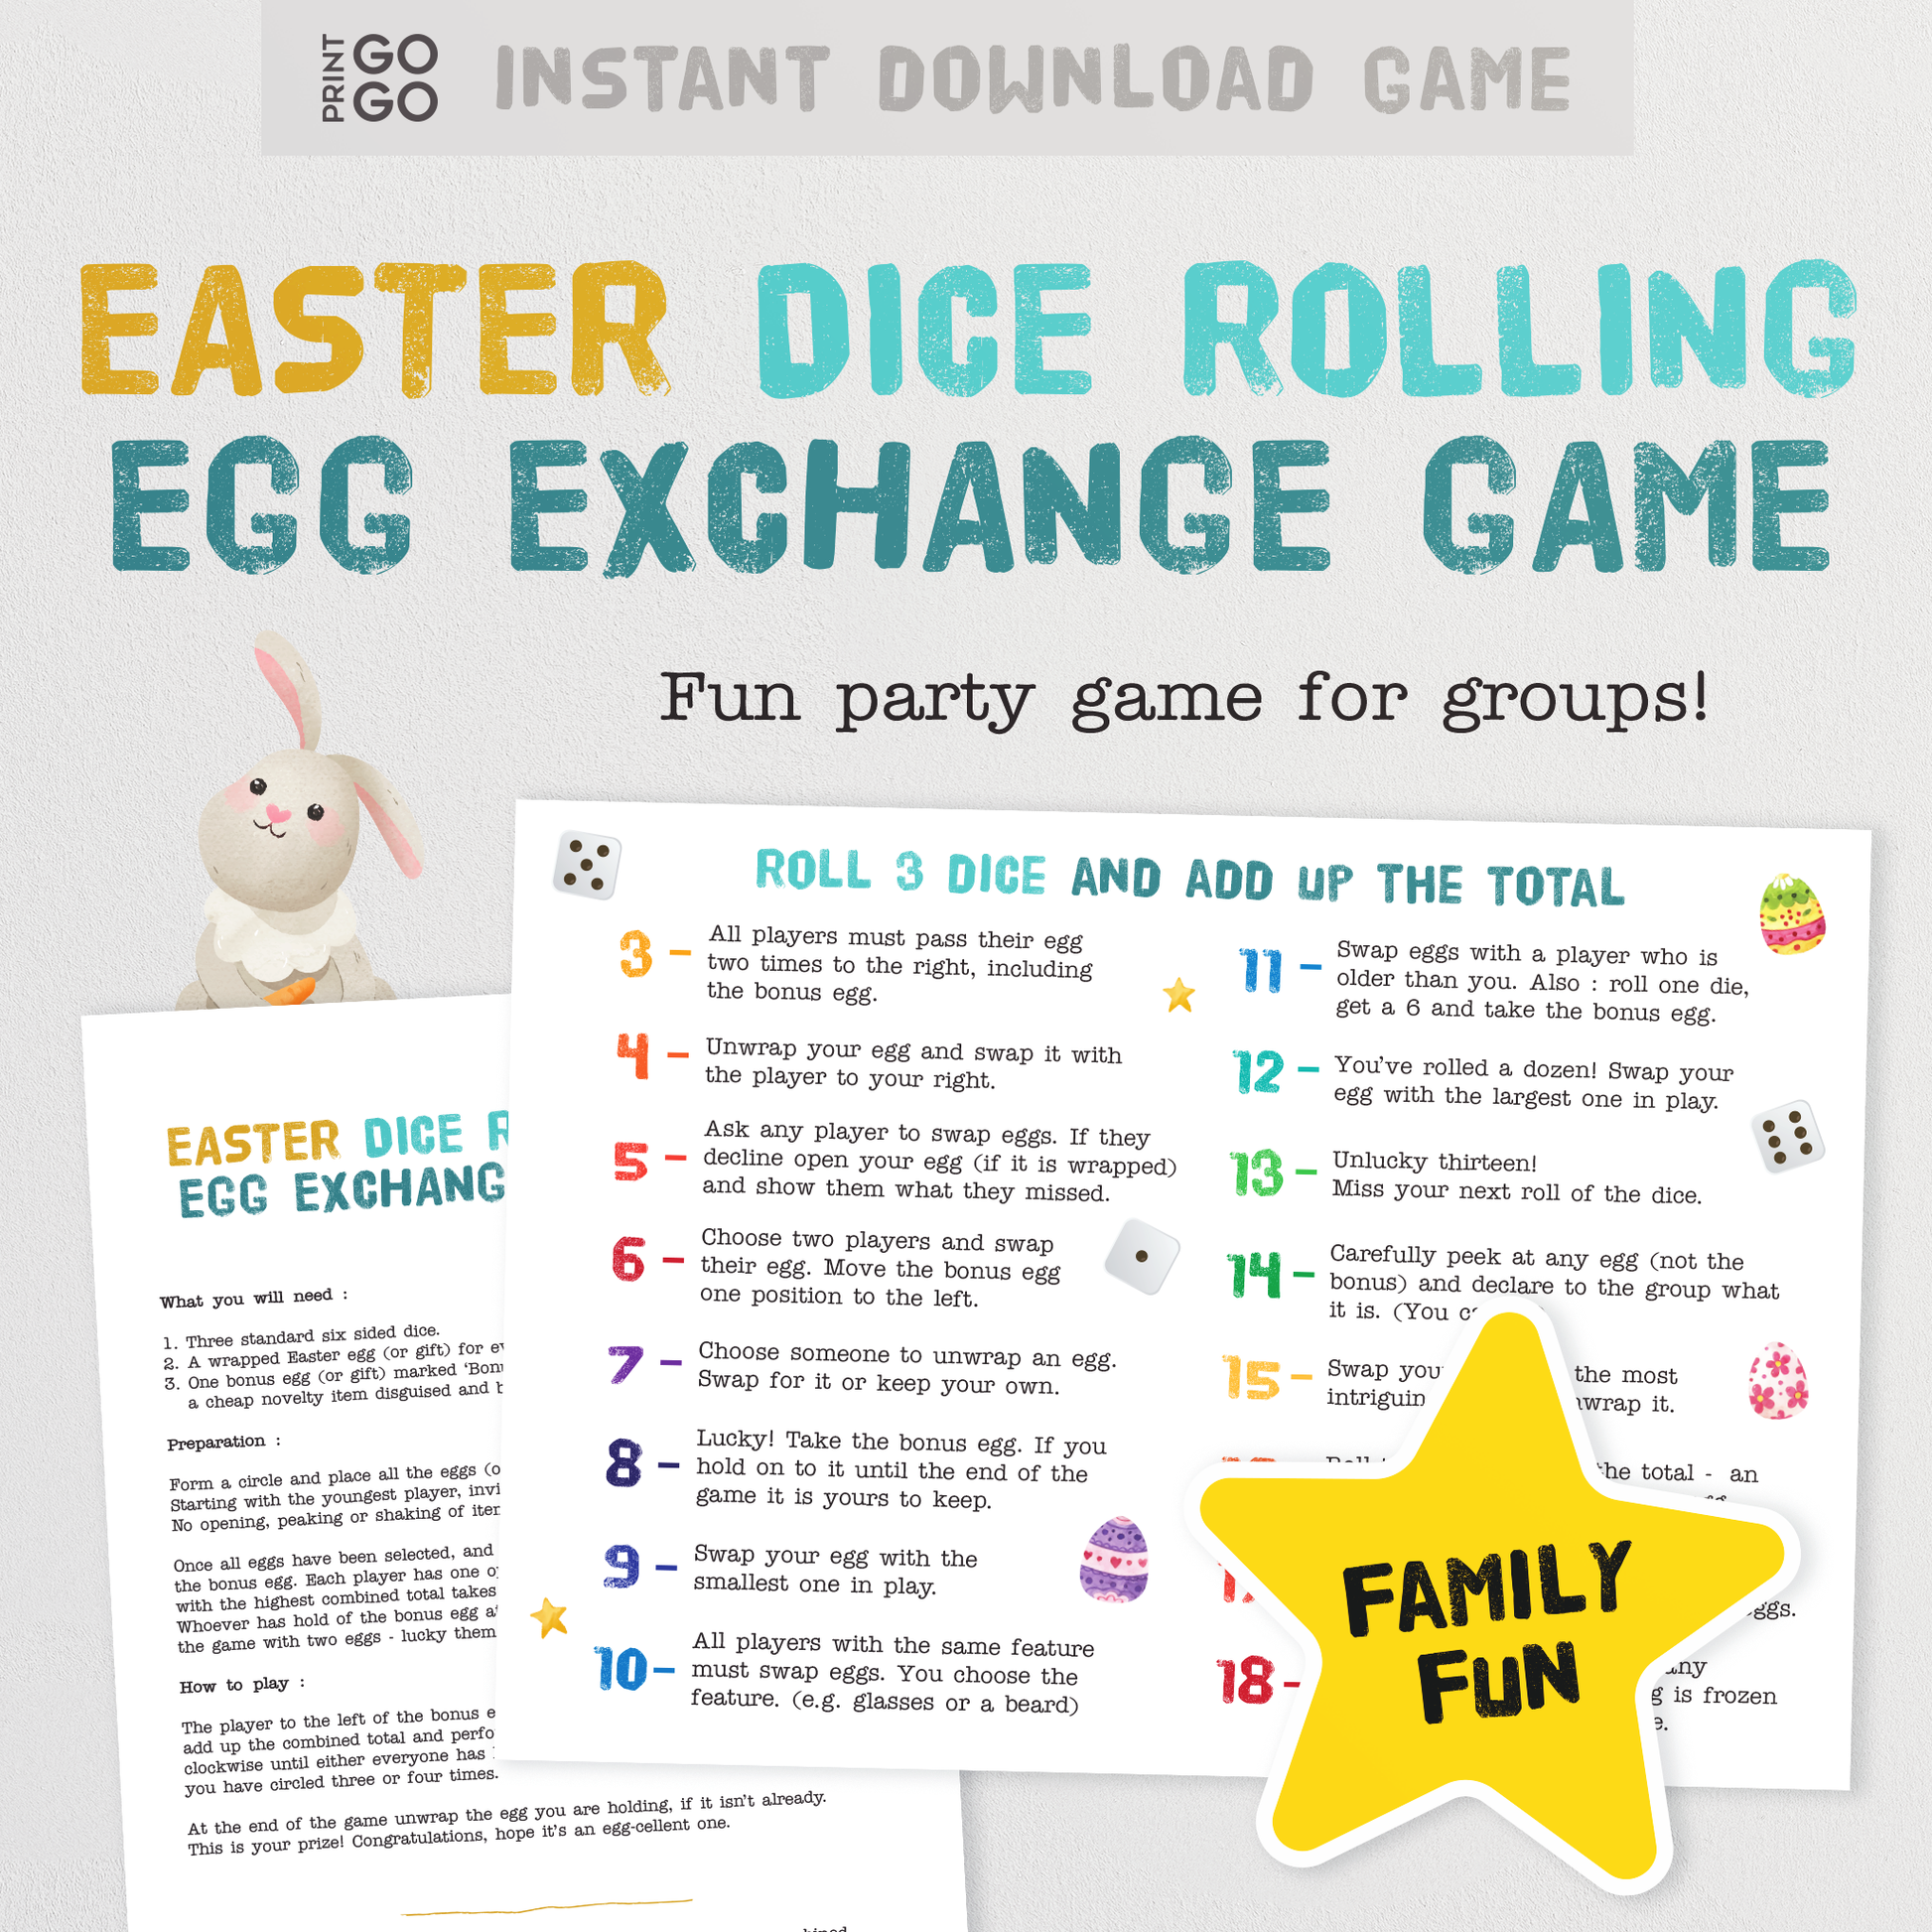 Easter Roll the Dice Egg Exchange Game - The Hilarious Egg Swapping Party Game for Families